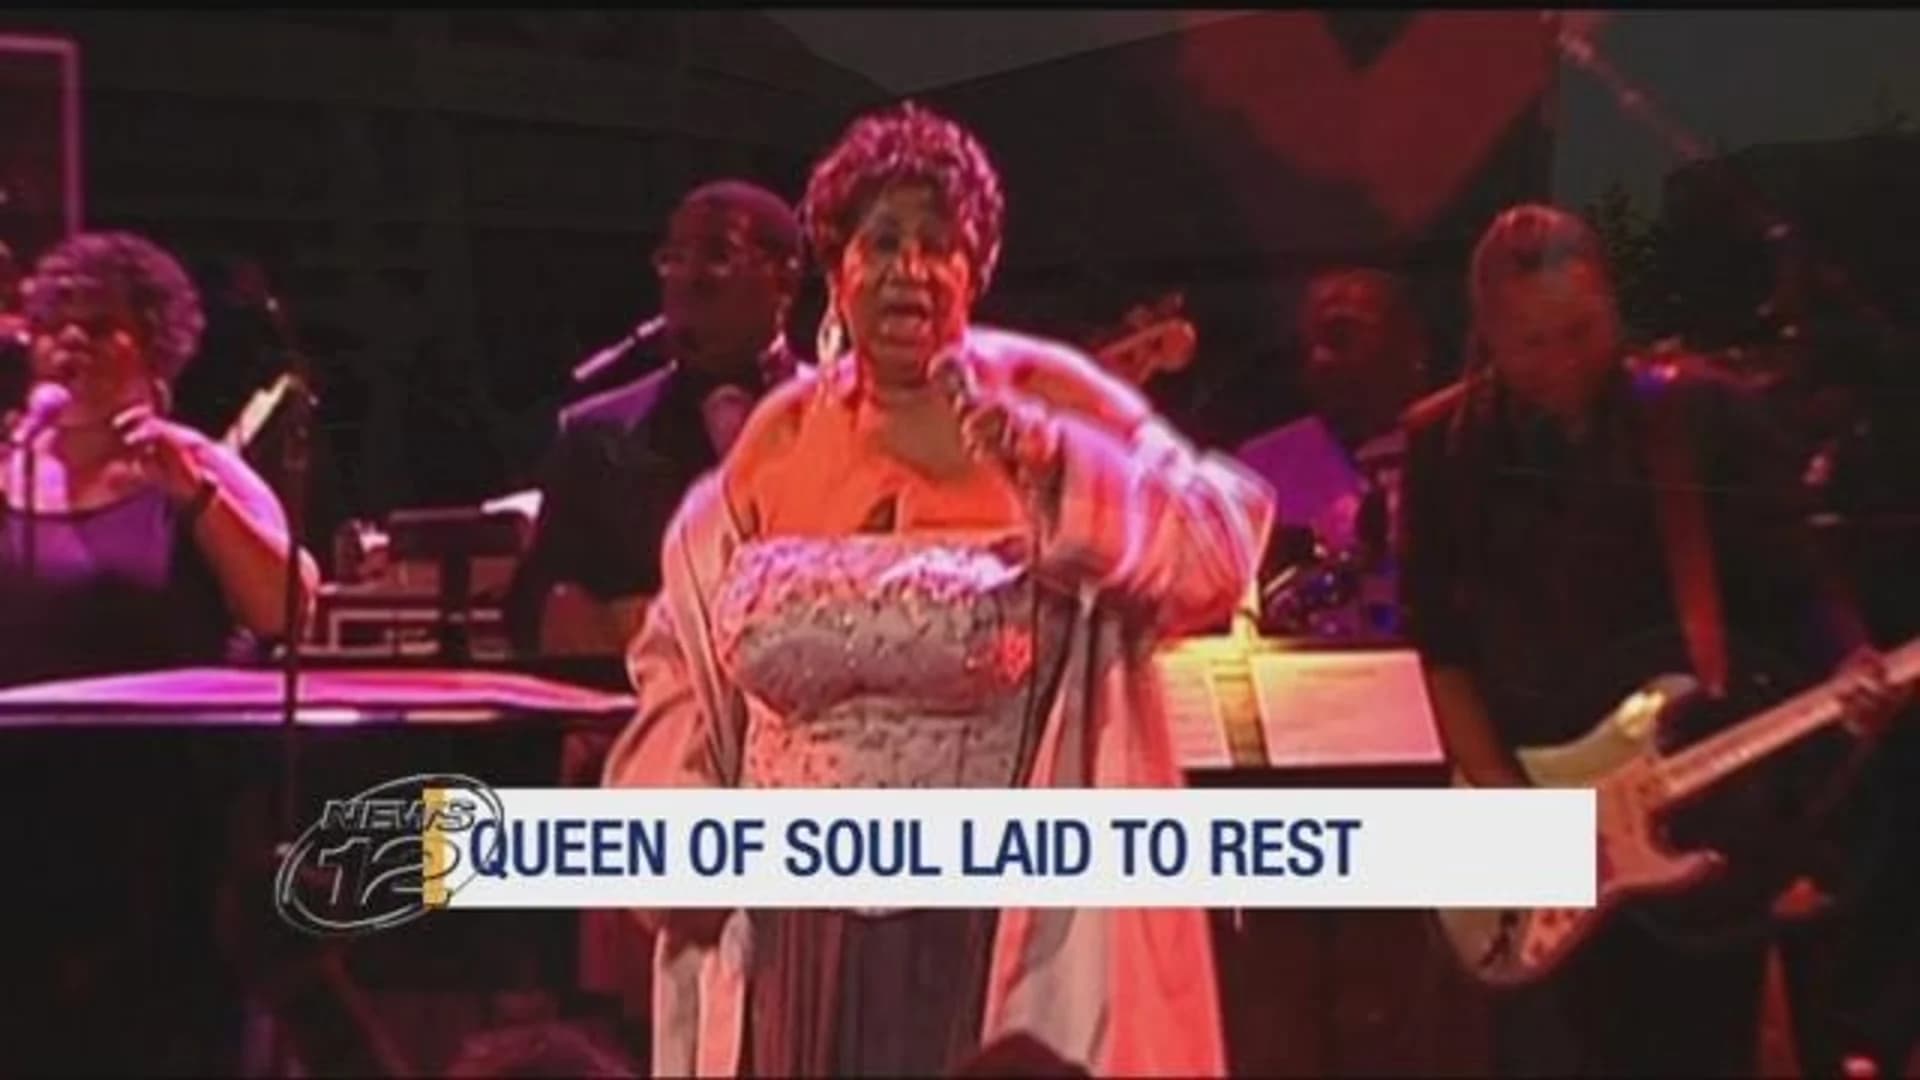 Presidents, pop stars join in epic farewell to Queen of Soul